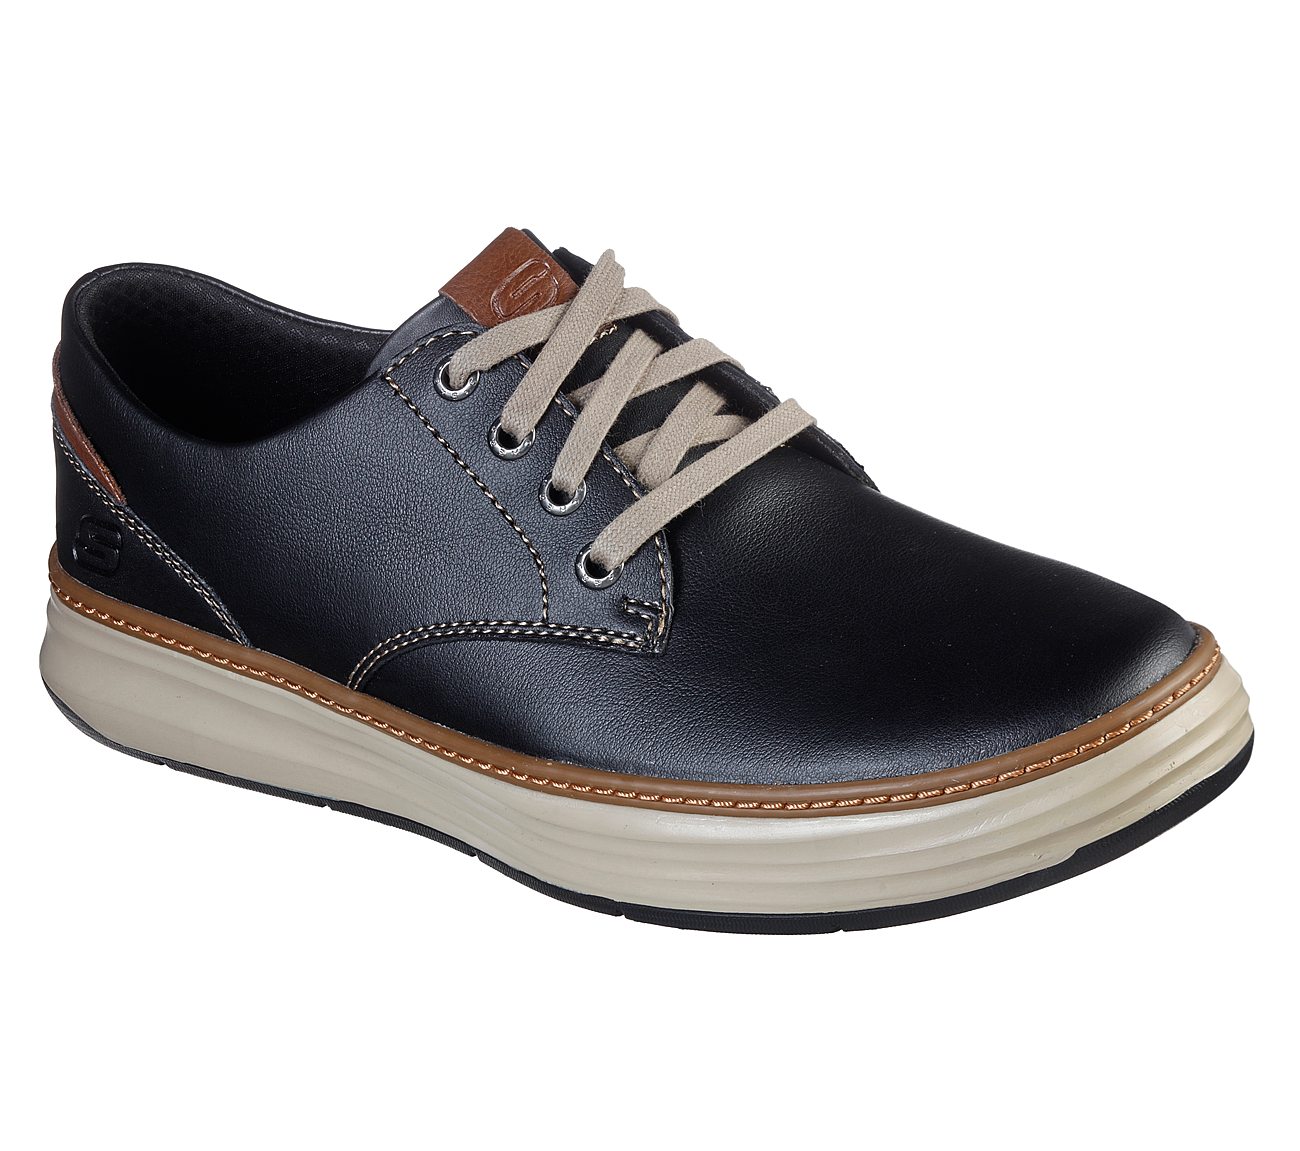 SKECHERS Moreno - Gustom USA Casuals Shoes